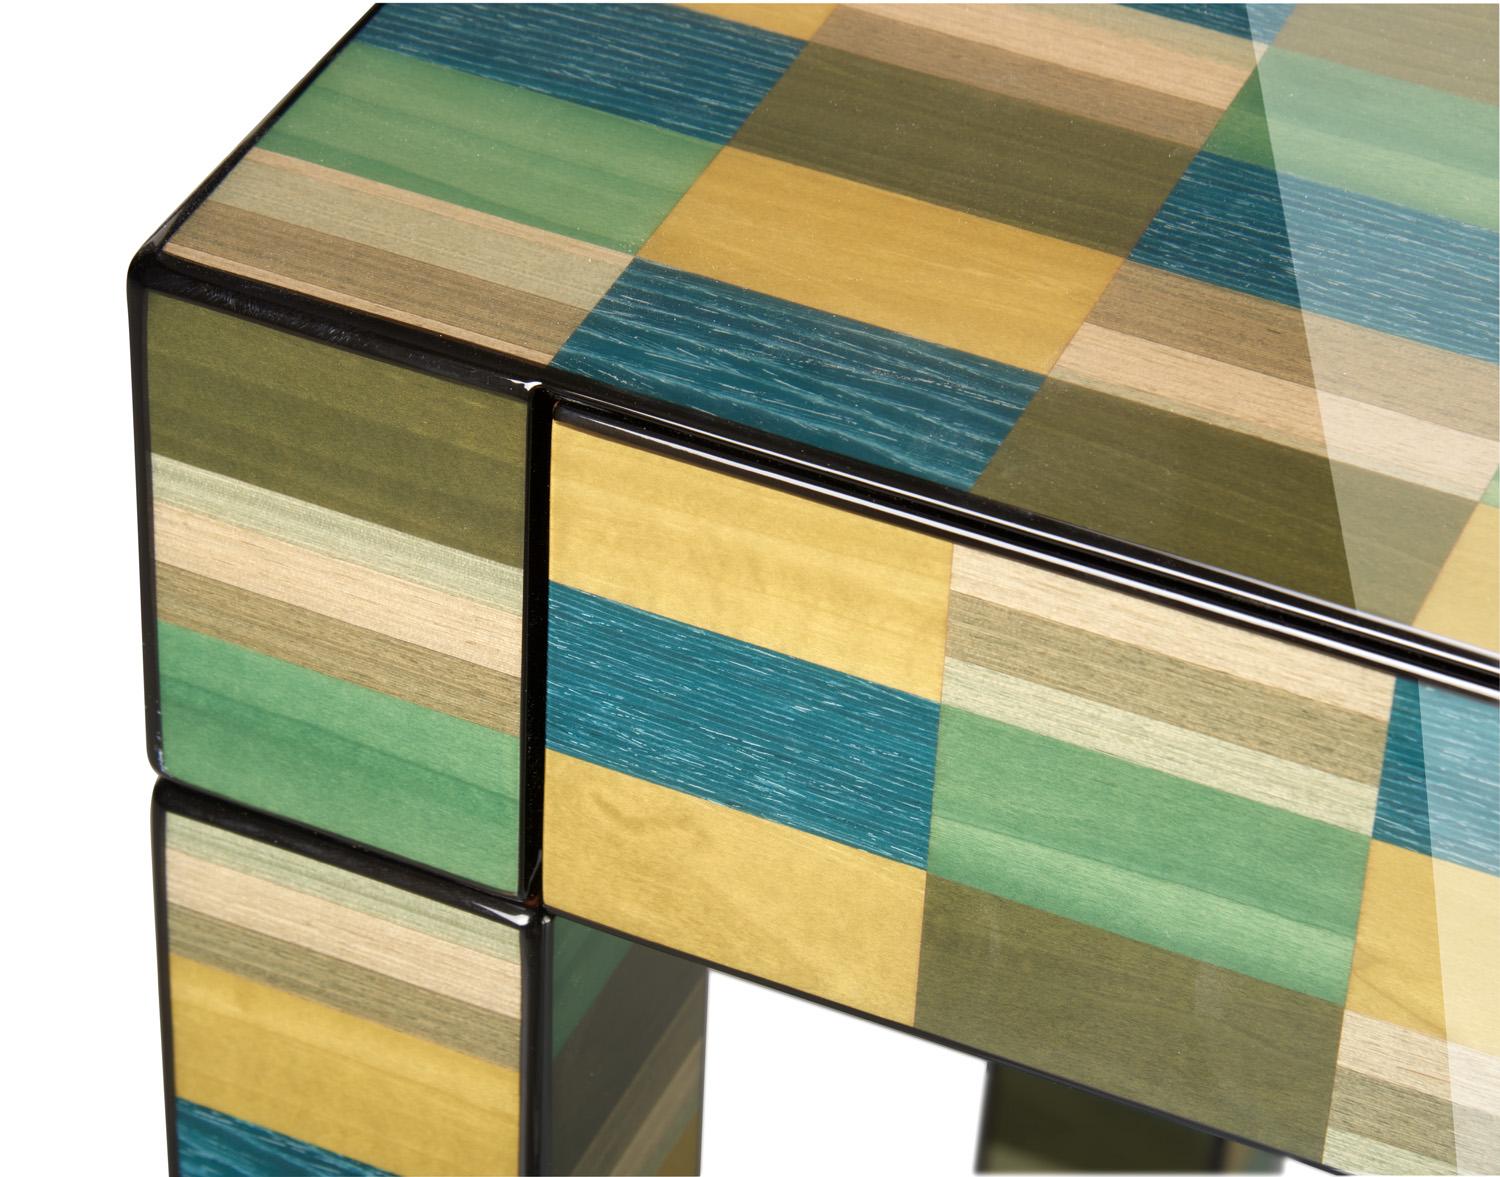 A superlative showcase of craftsmanship paying tribute to modern art, this coffee table will create a bold and captivating focal point in any contemporary or eclectic interior. Entirely handcrafted of wood, it is characterized by a geometric motif